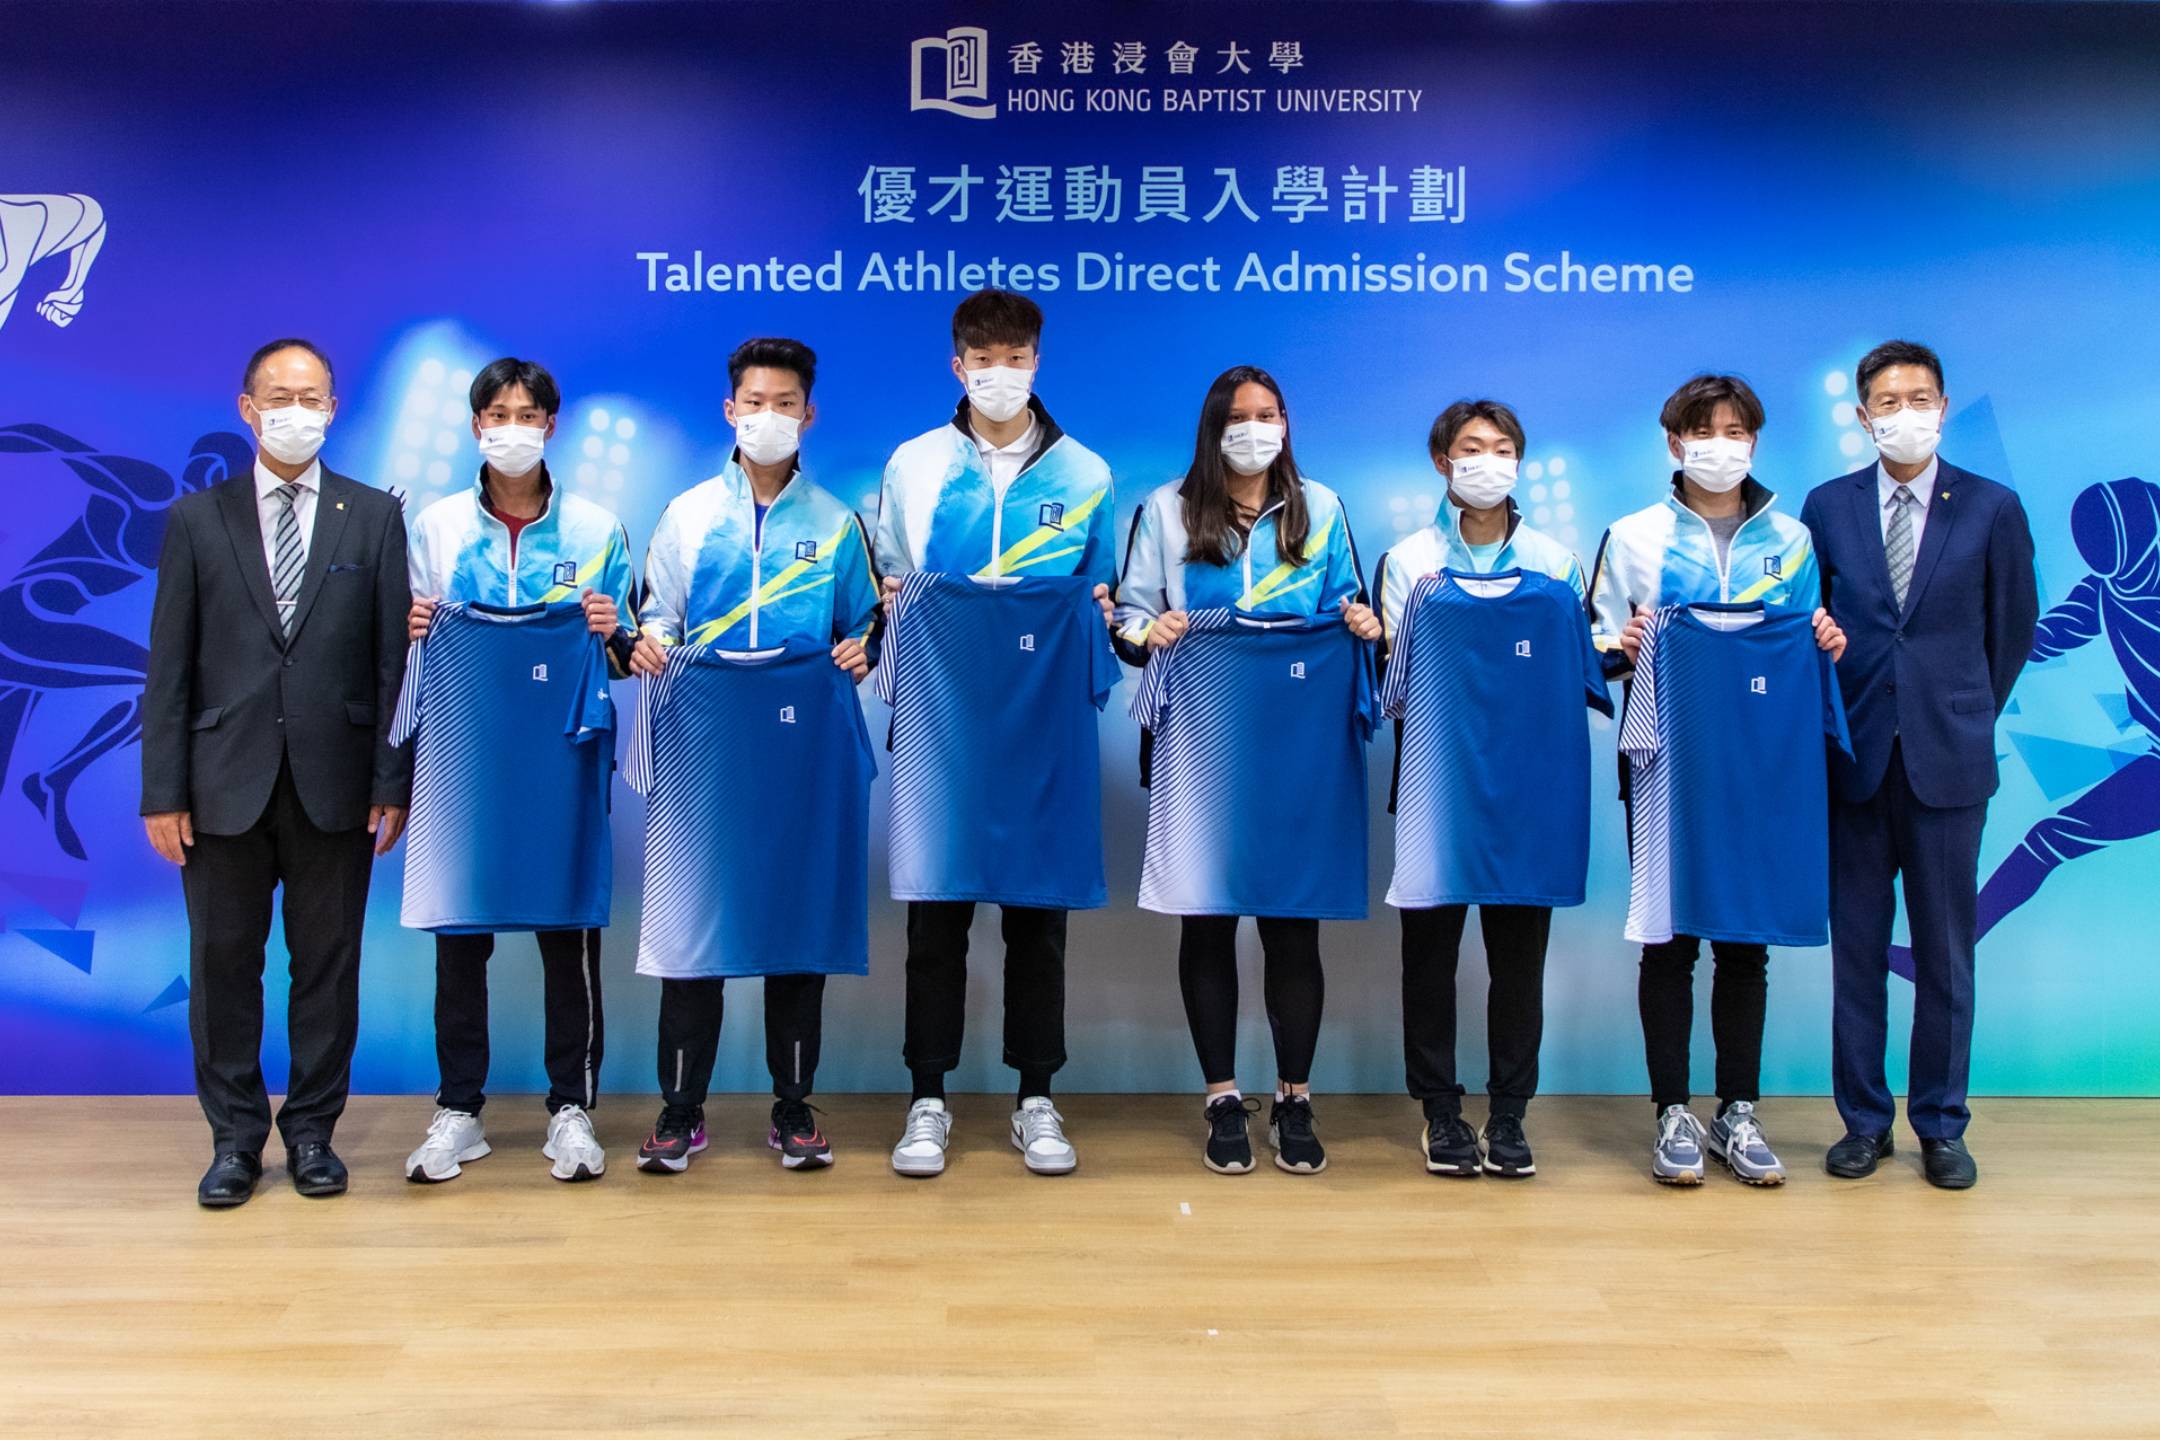 Professor Alexander Wai (first left) and Dr Albert Chau (first right) present the official T-shirt of HKBU’s sports team to the six elite athletes, namely (from second left) Kwan Man-ho, Shak Kam-ching, Cheung Ka-long, Forrest Shanna Sanman, Lau Chi-lung and Kwok Chun-hei.